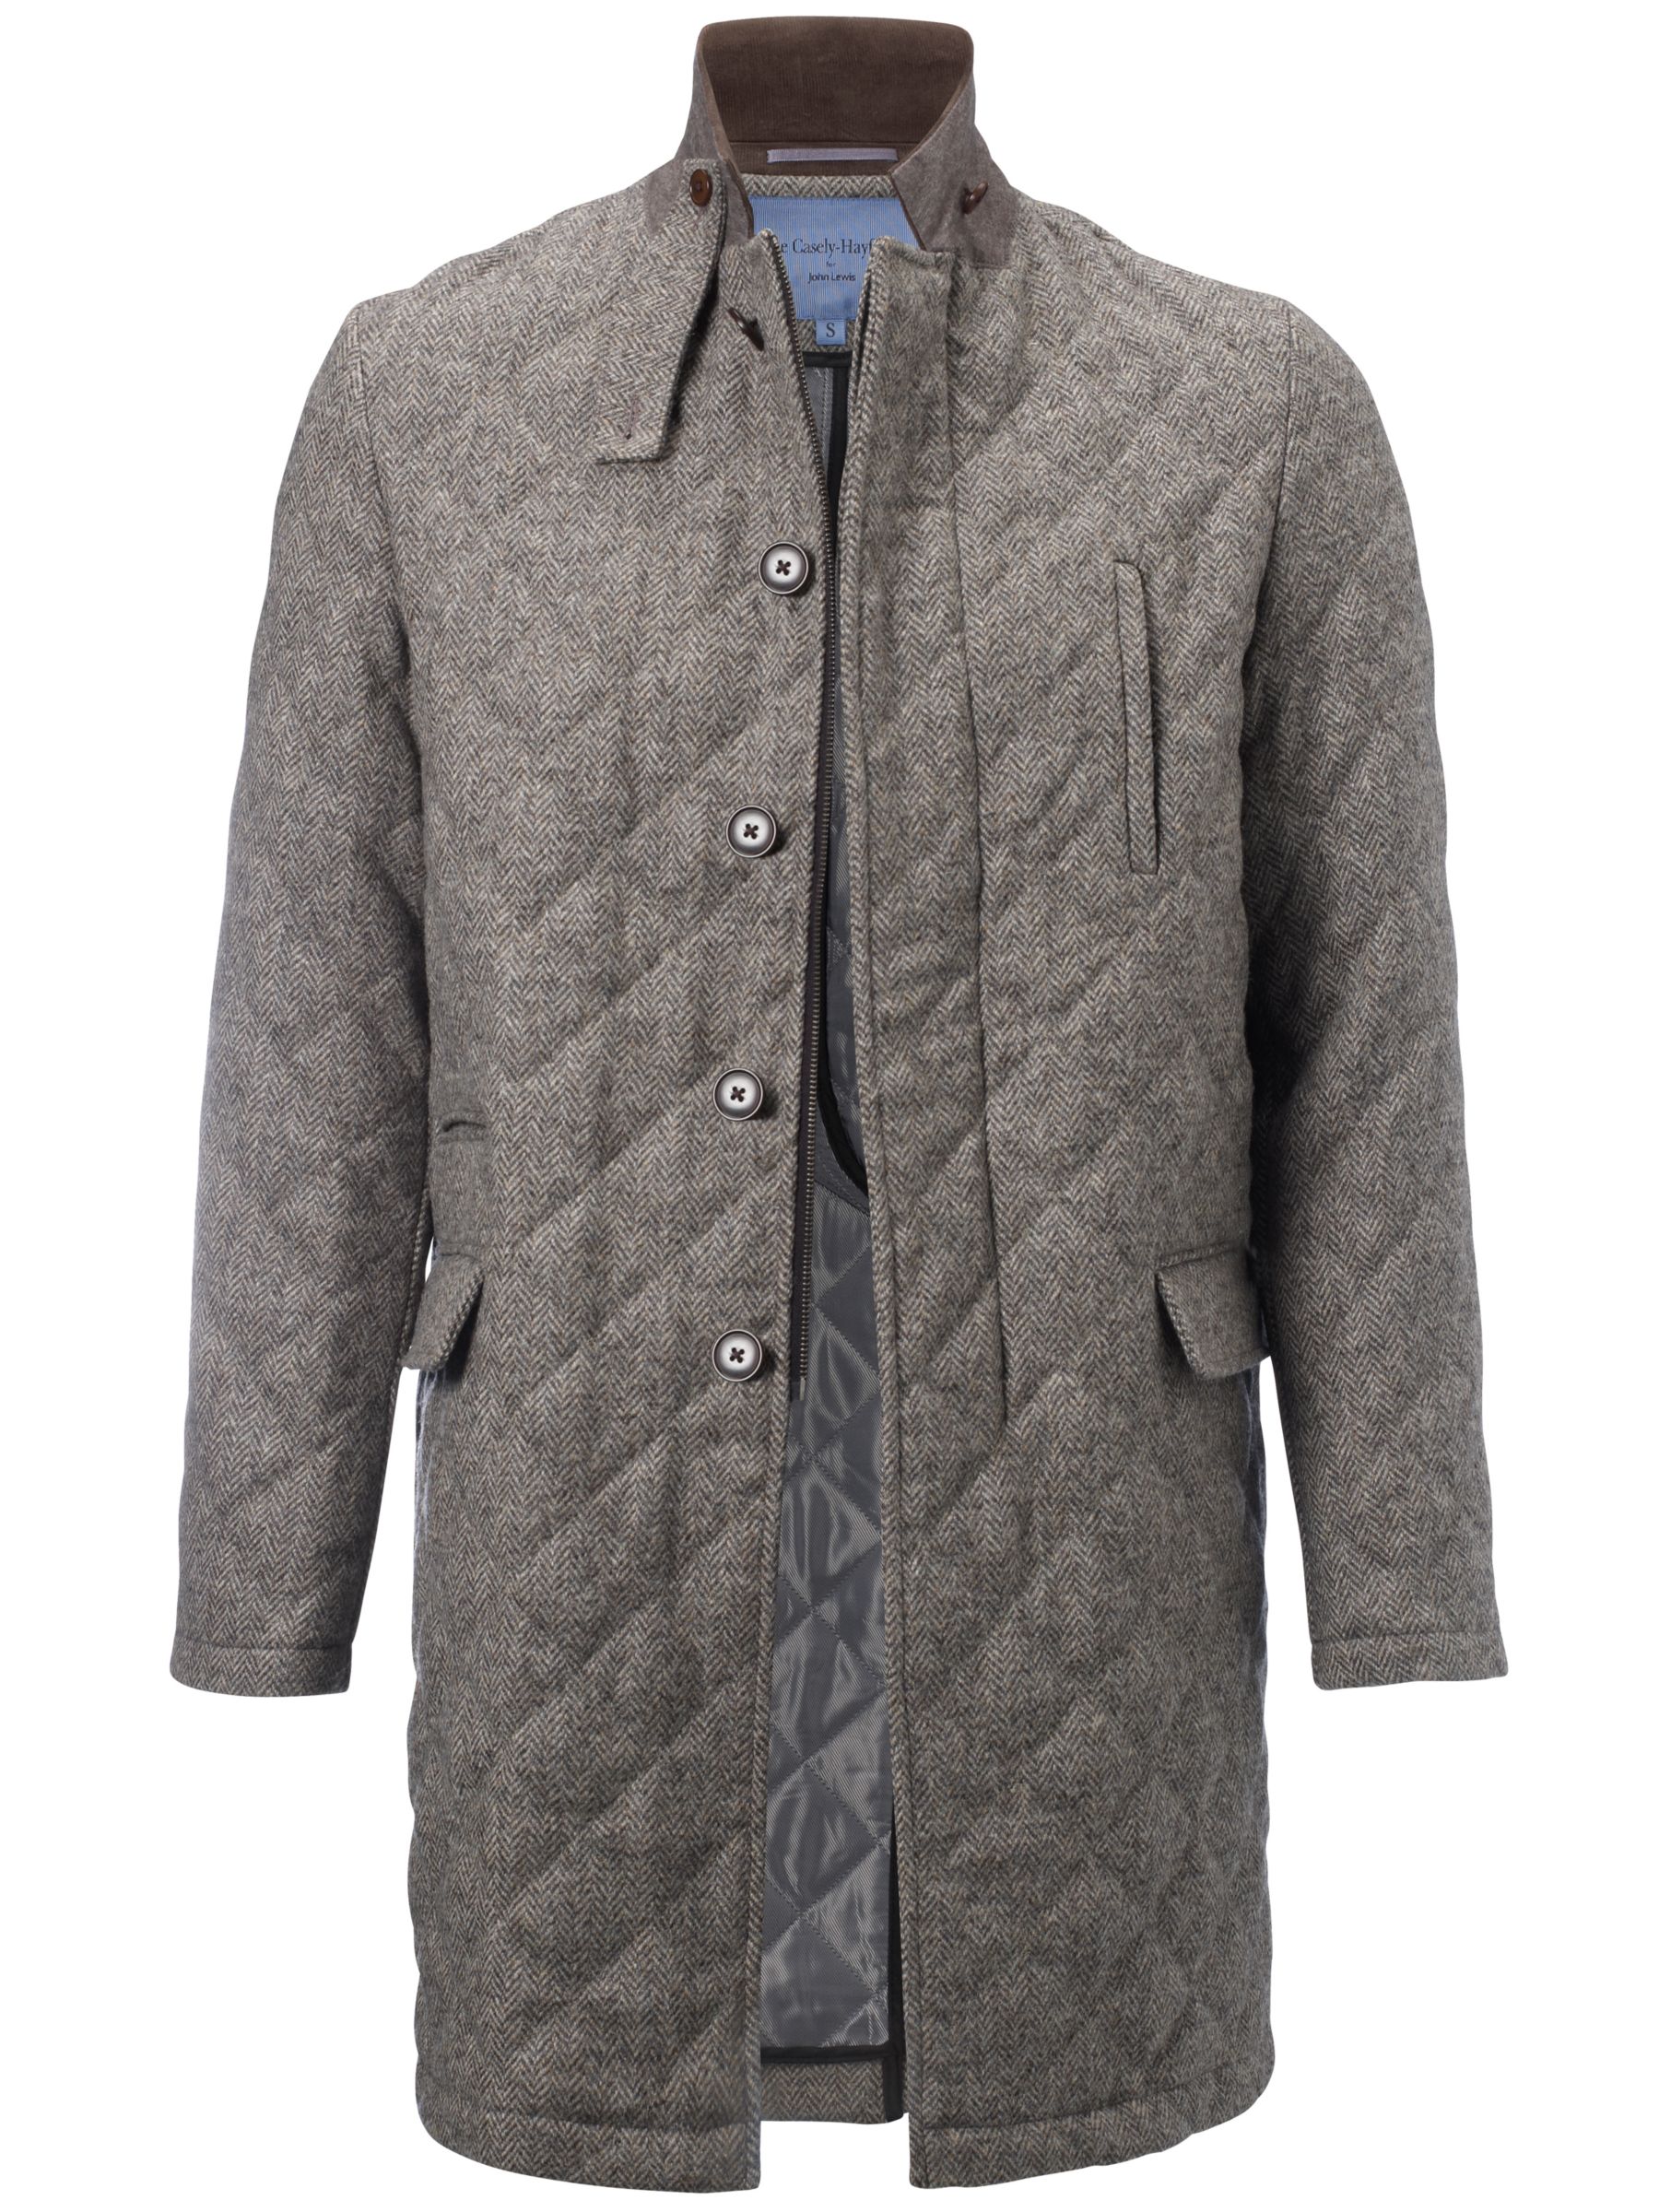 Joe Casely-Hayford for John Lewis Pallas Quilted Field Coat, Natural at John Lewis